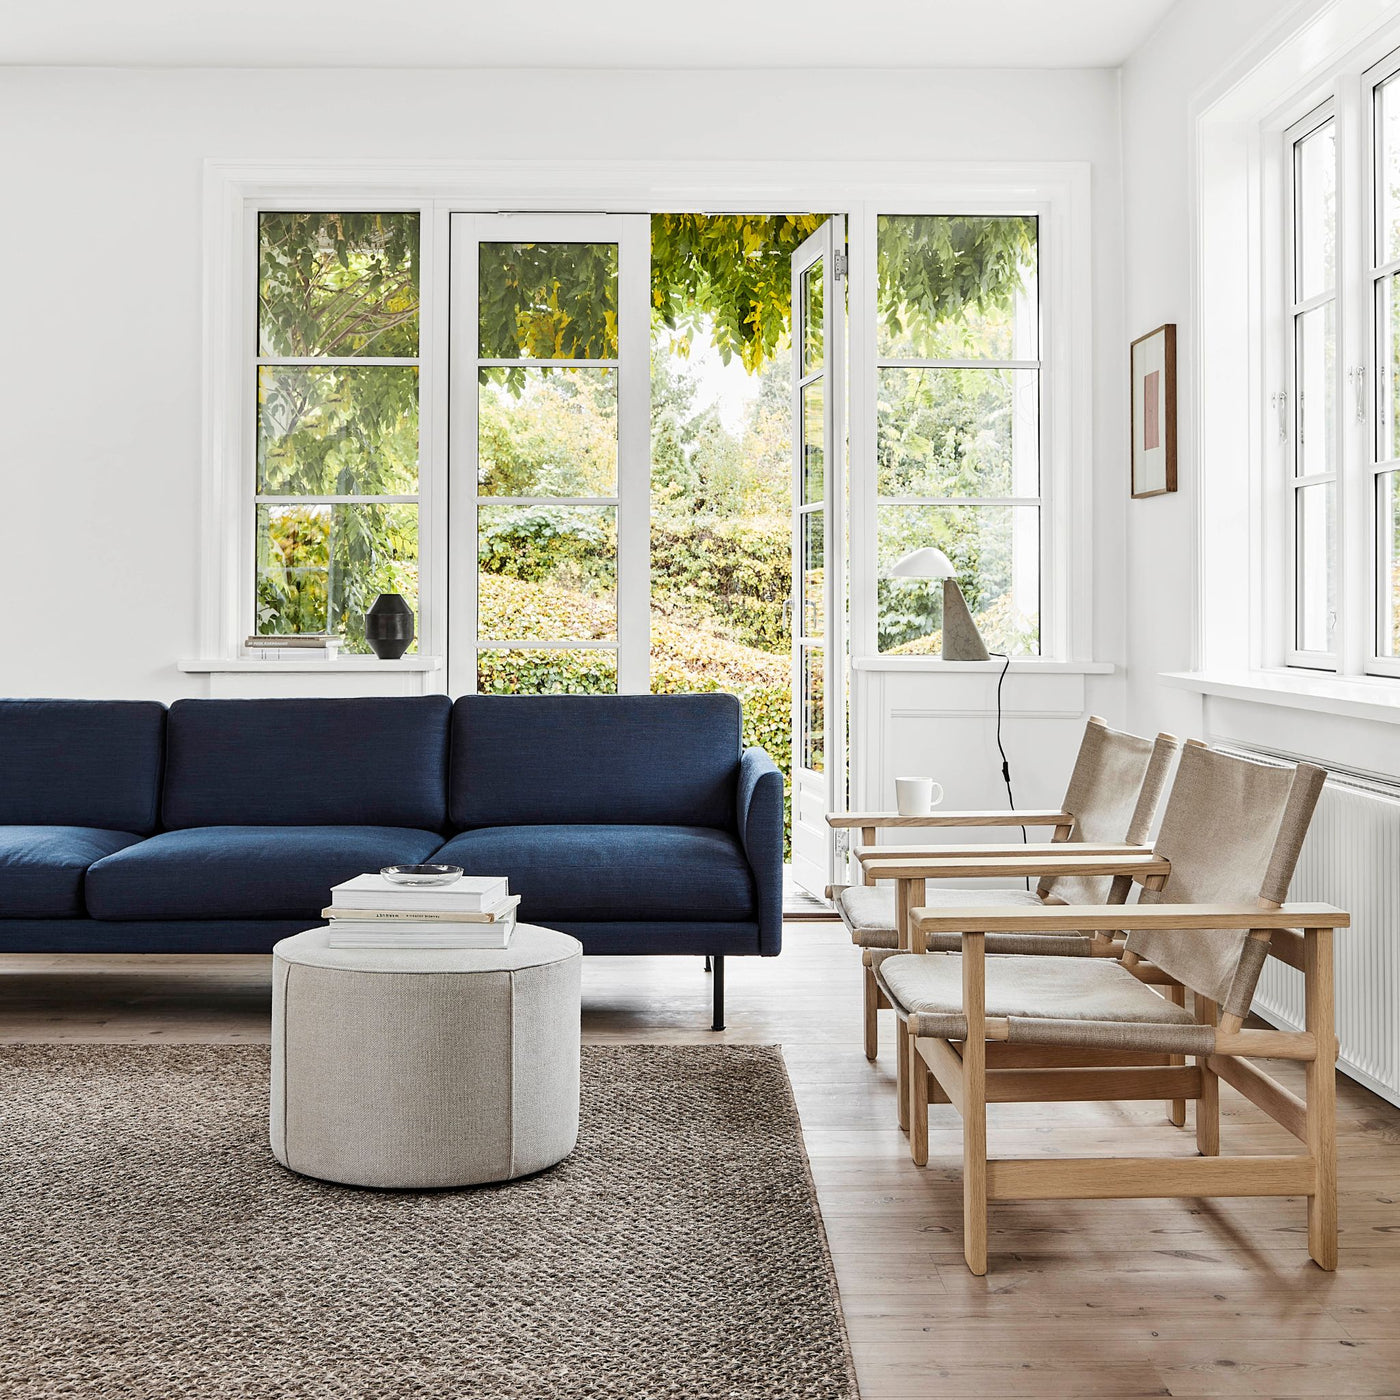 Fredericia Calmo Sofa and Borge Mogensen Canvas Chairs in Living Room with Abundant Natural Light